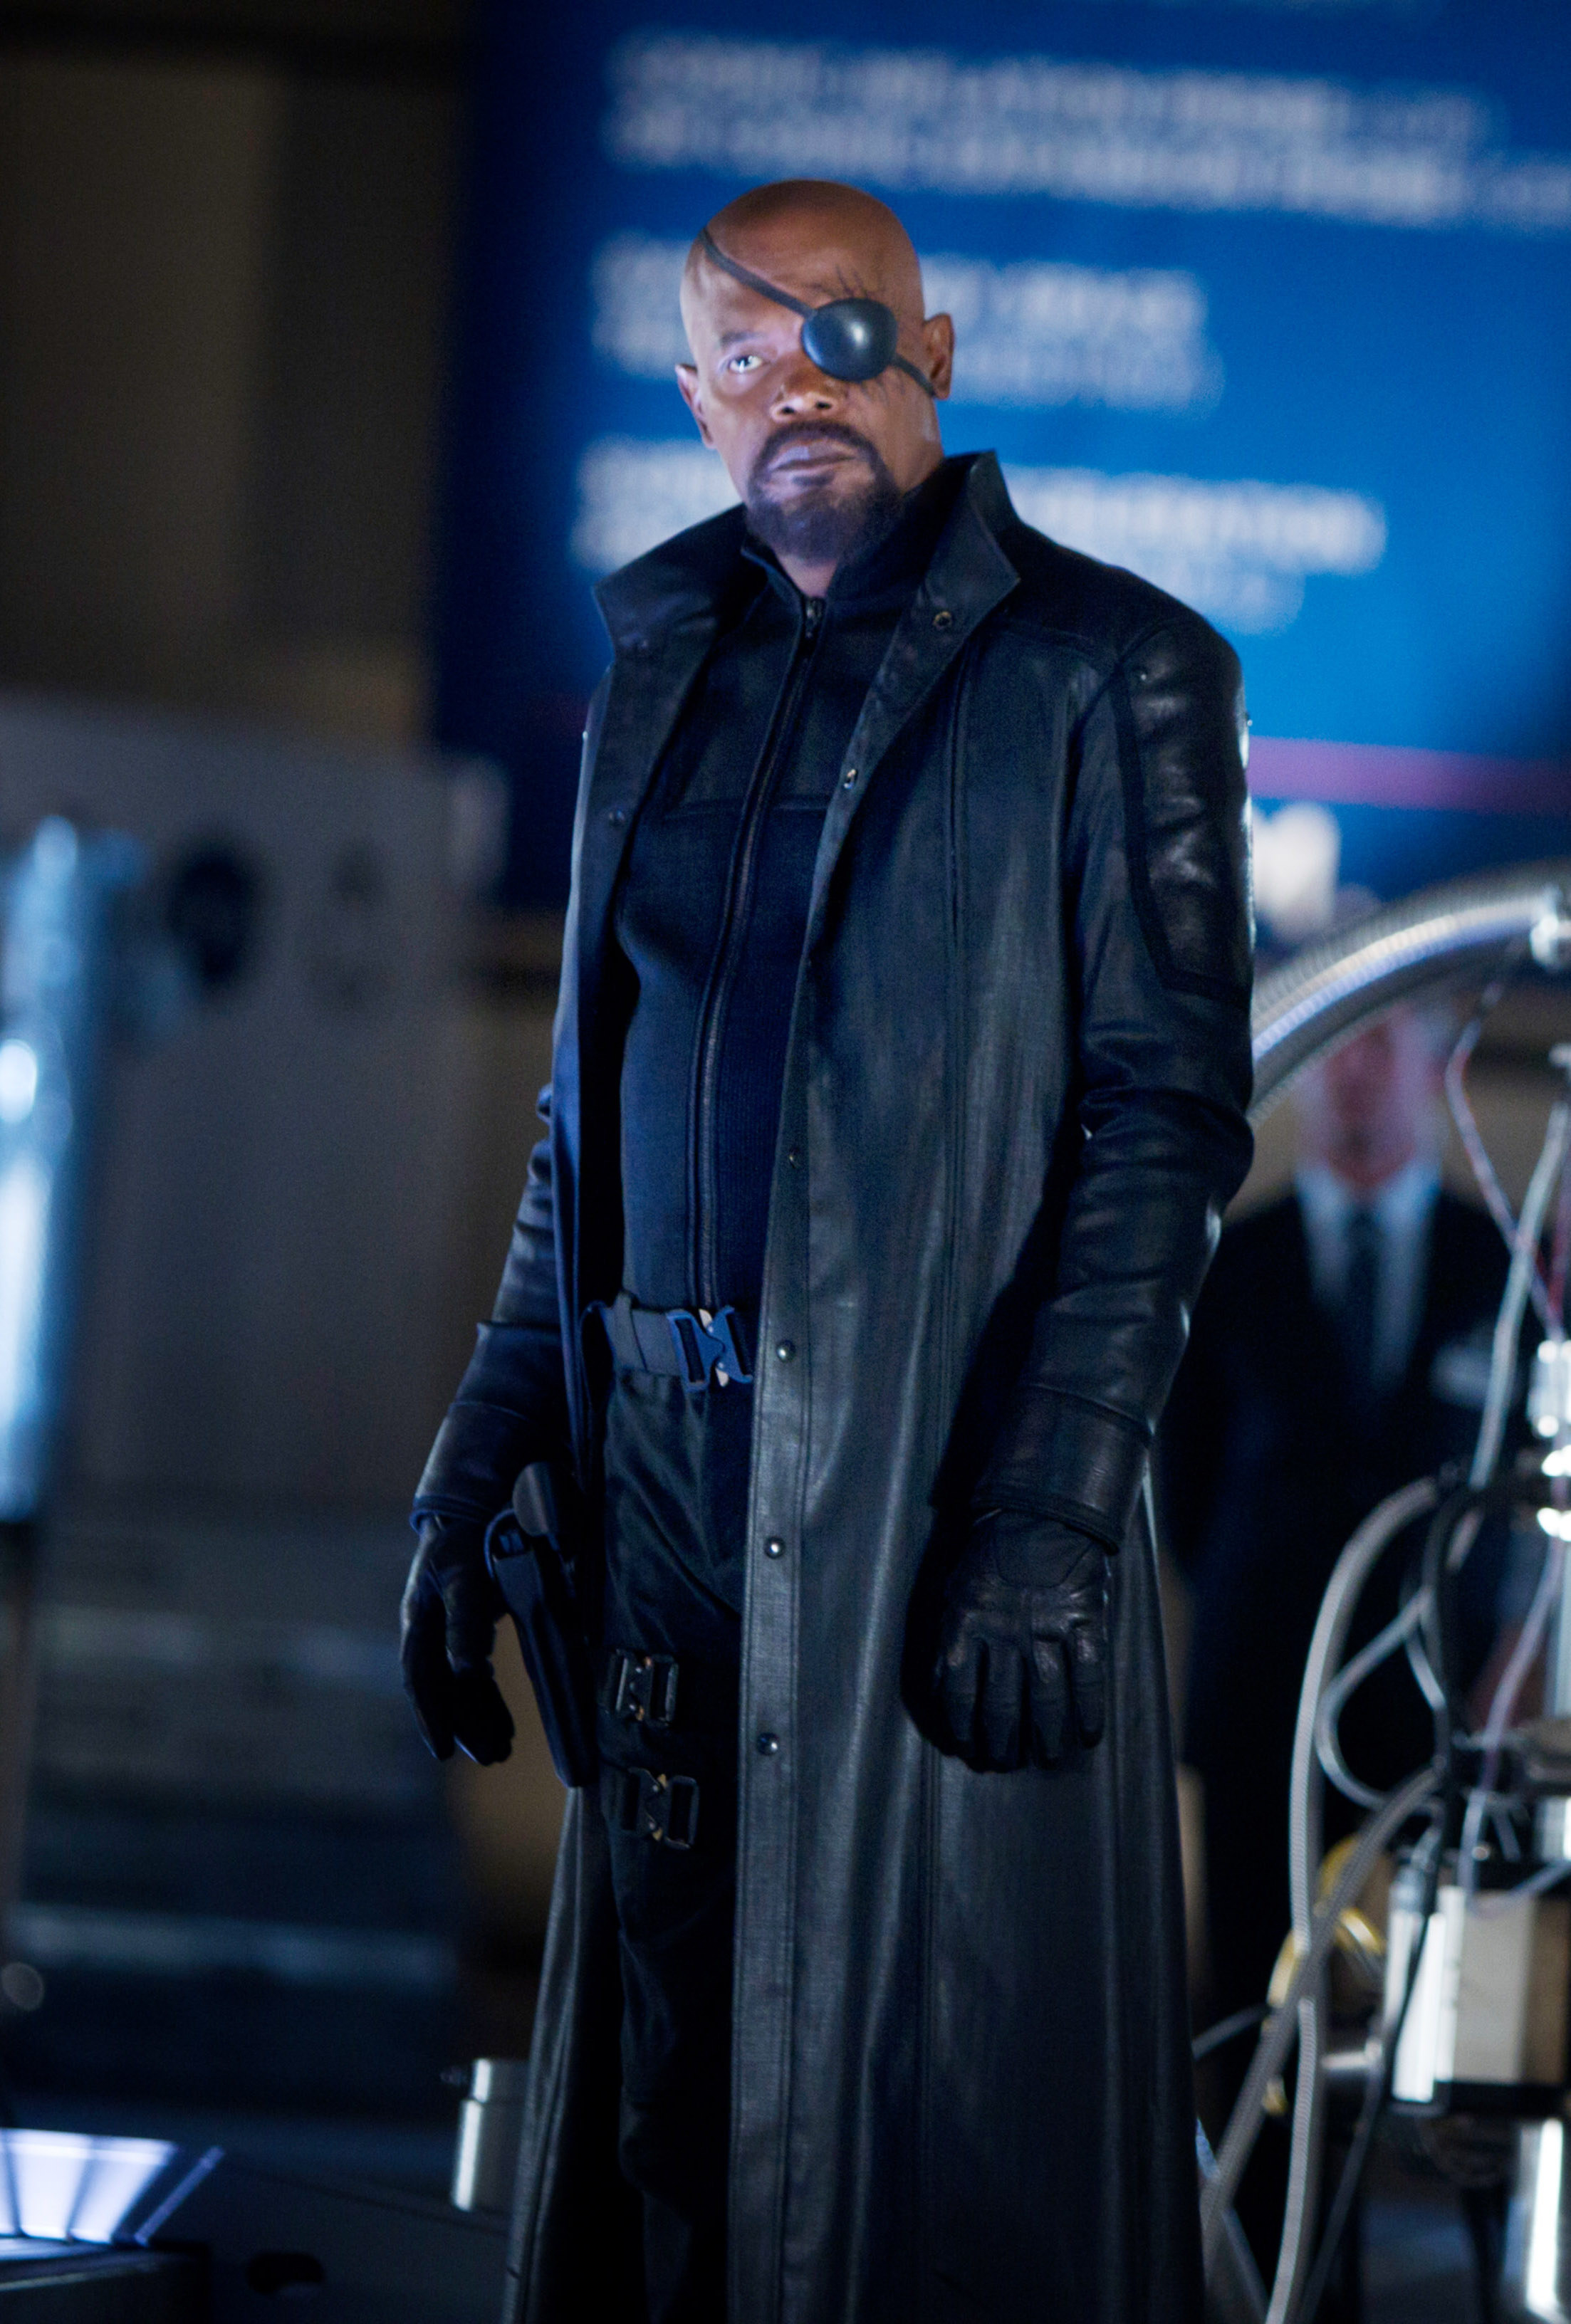 Nick Fury in his classic outfit